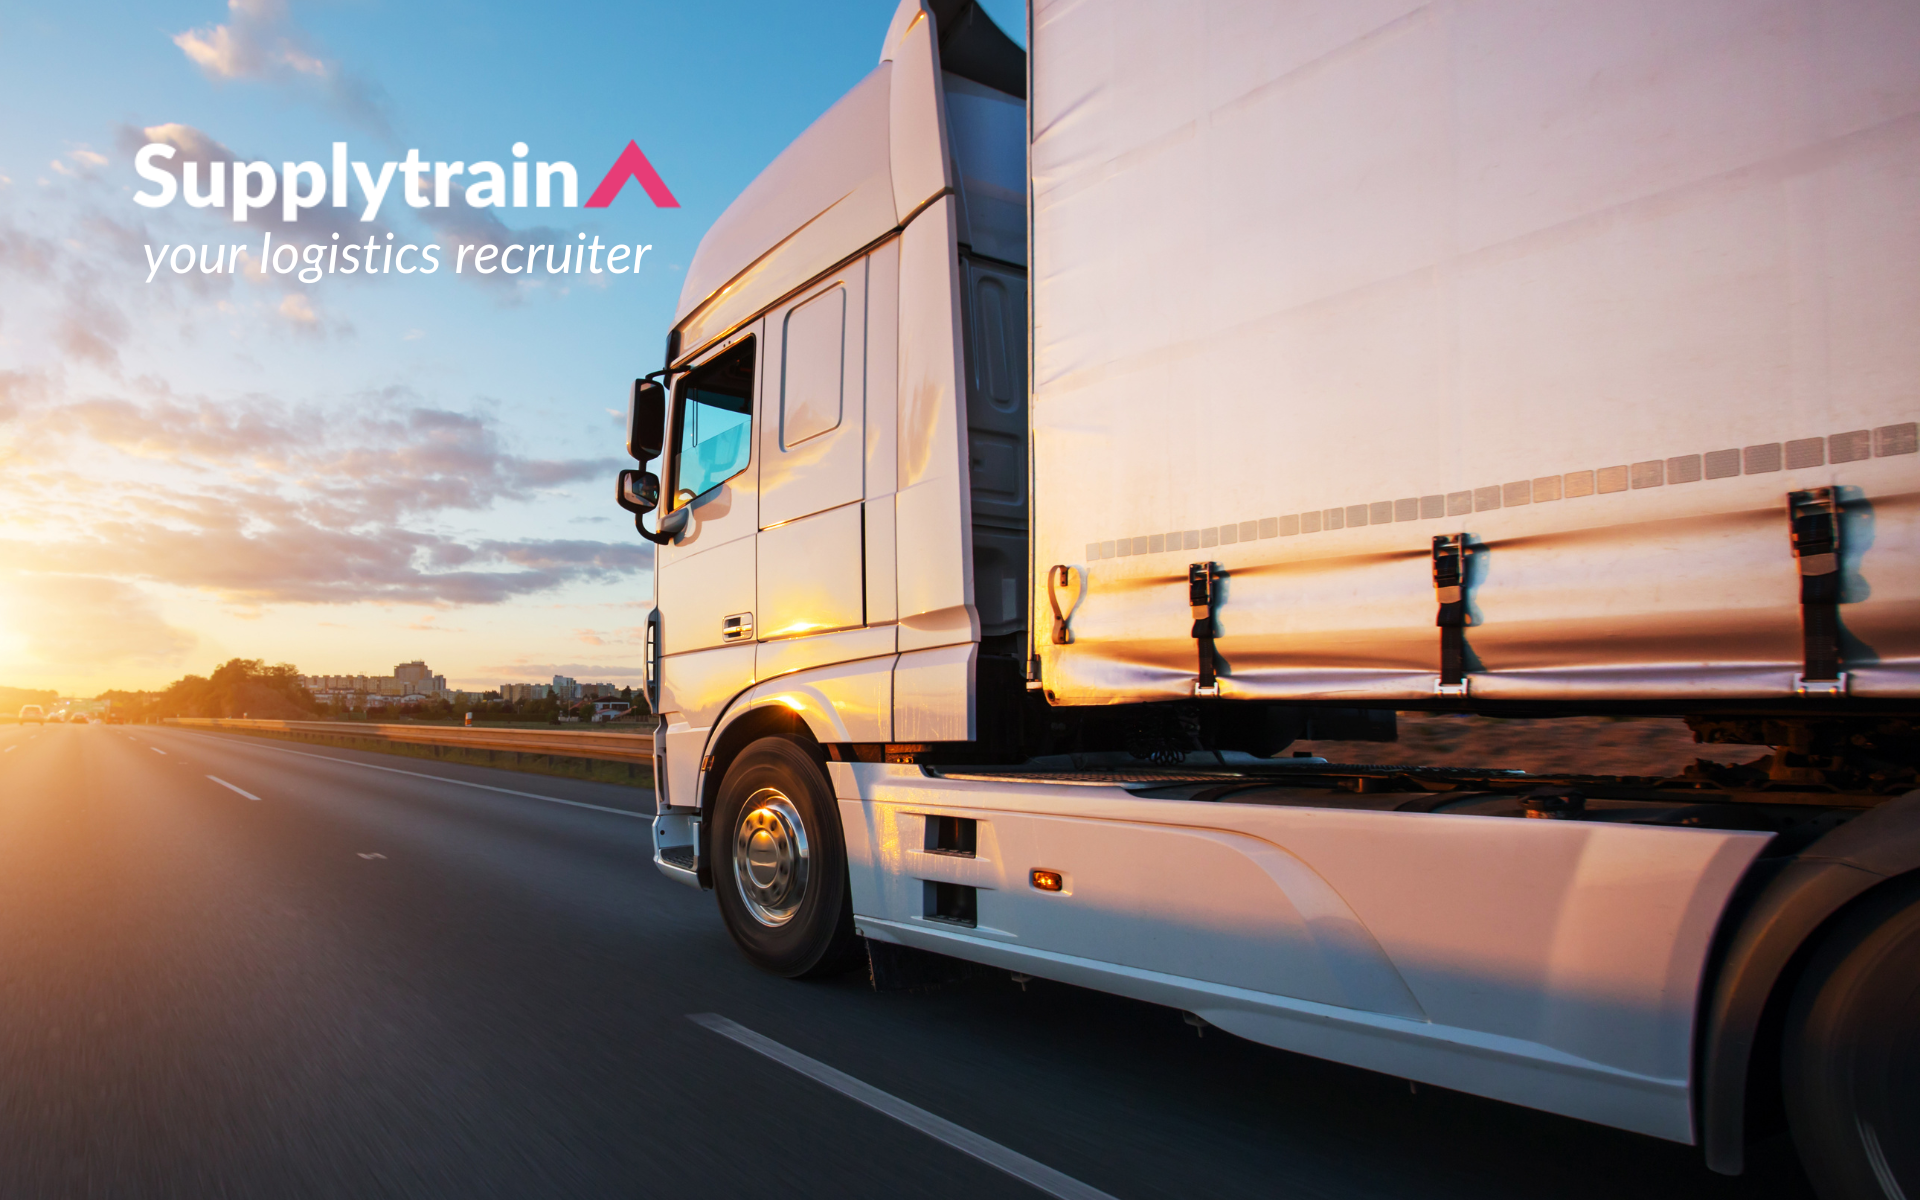 Choose Supplytrain for your supply chain and logistics recruitment 